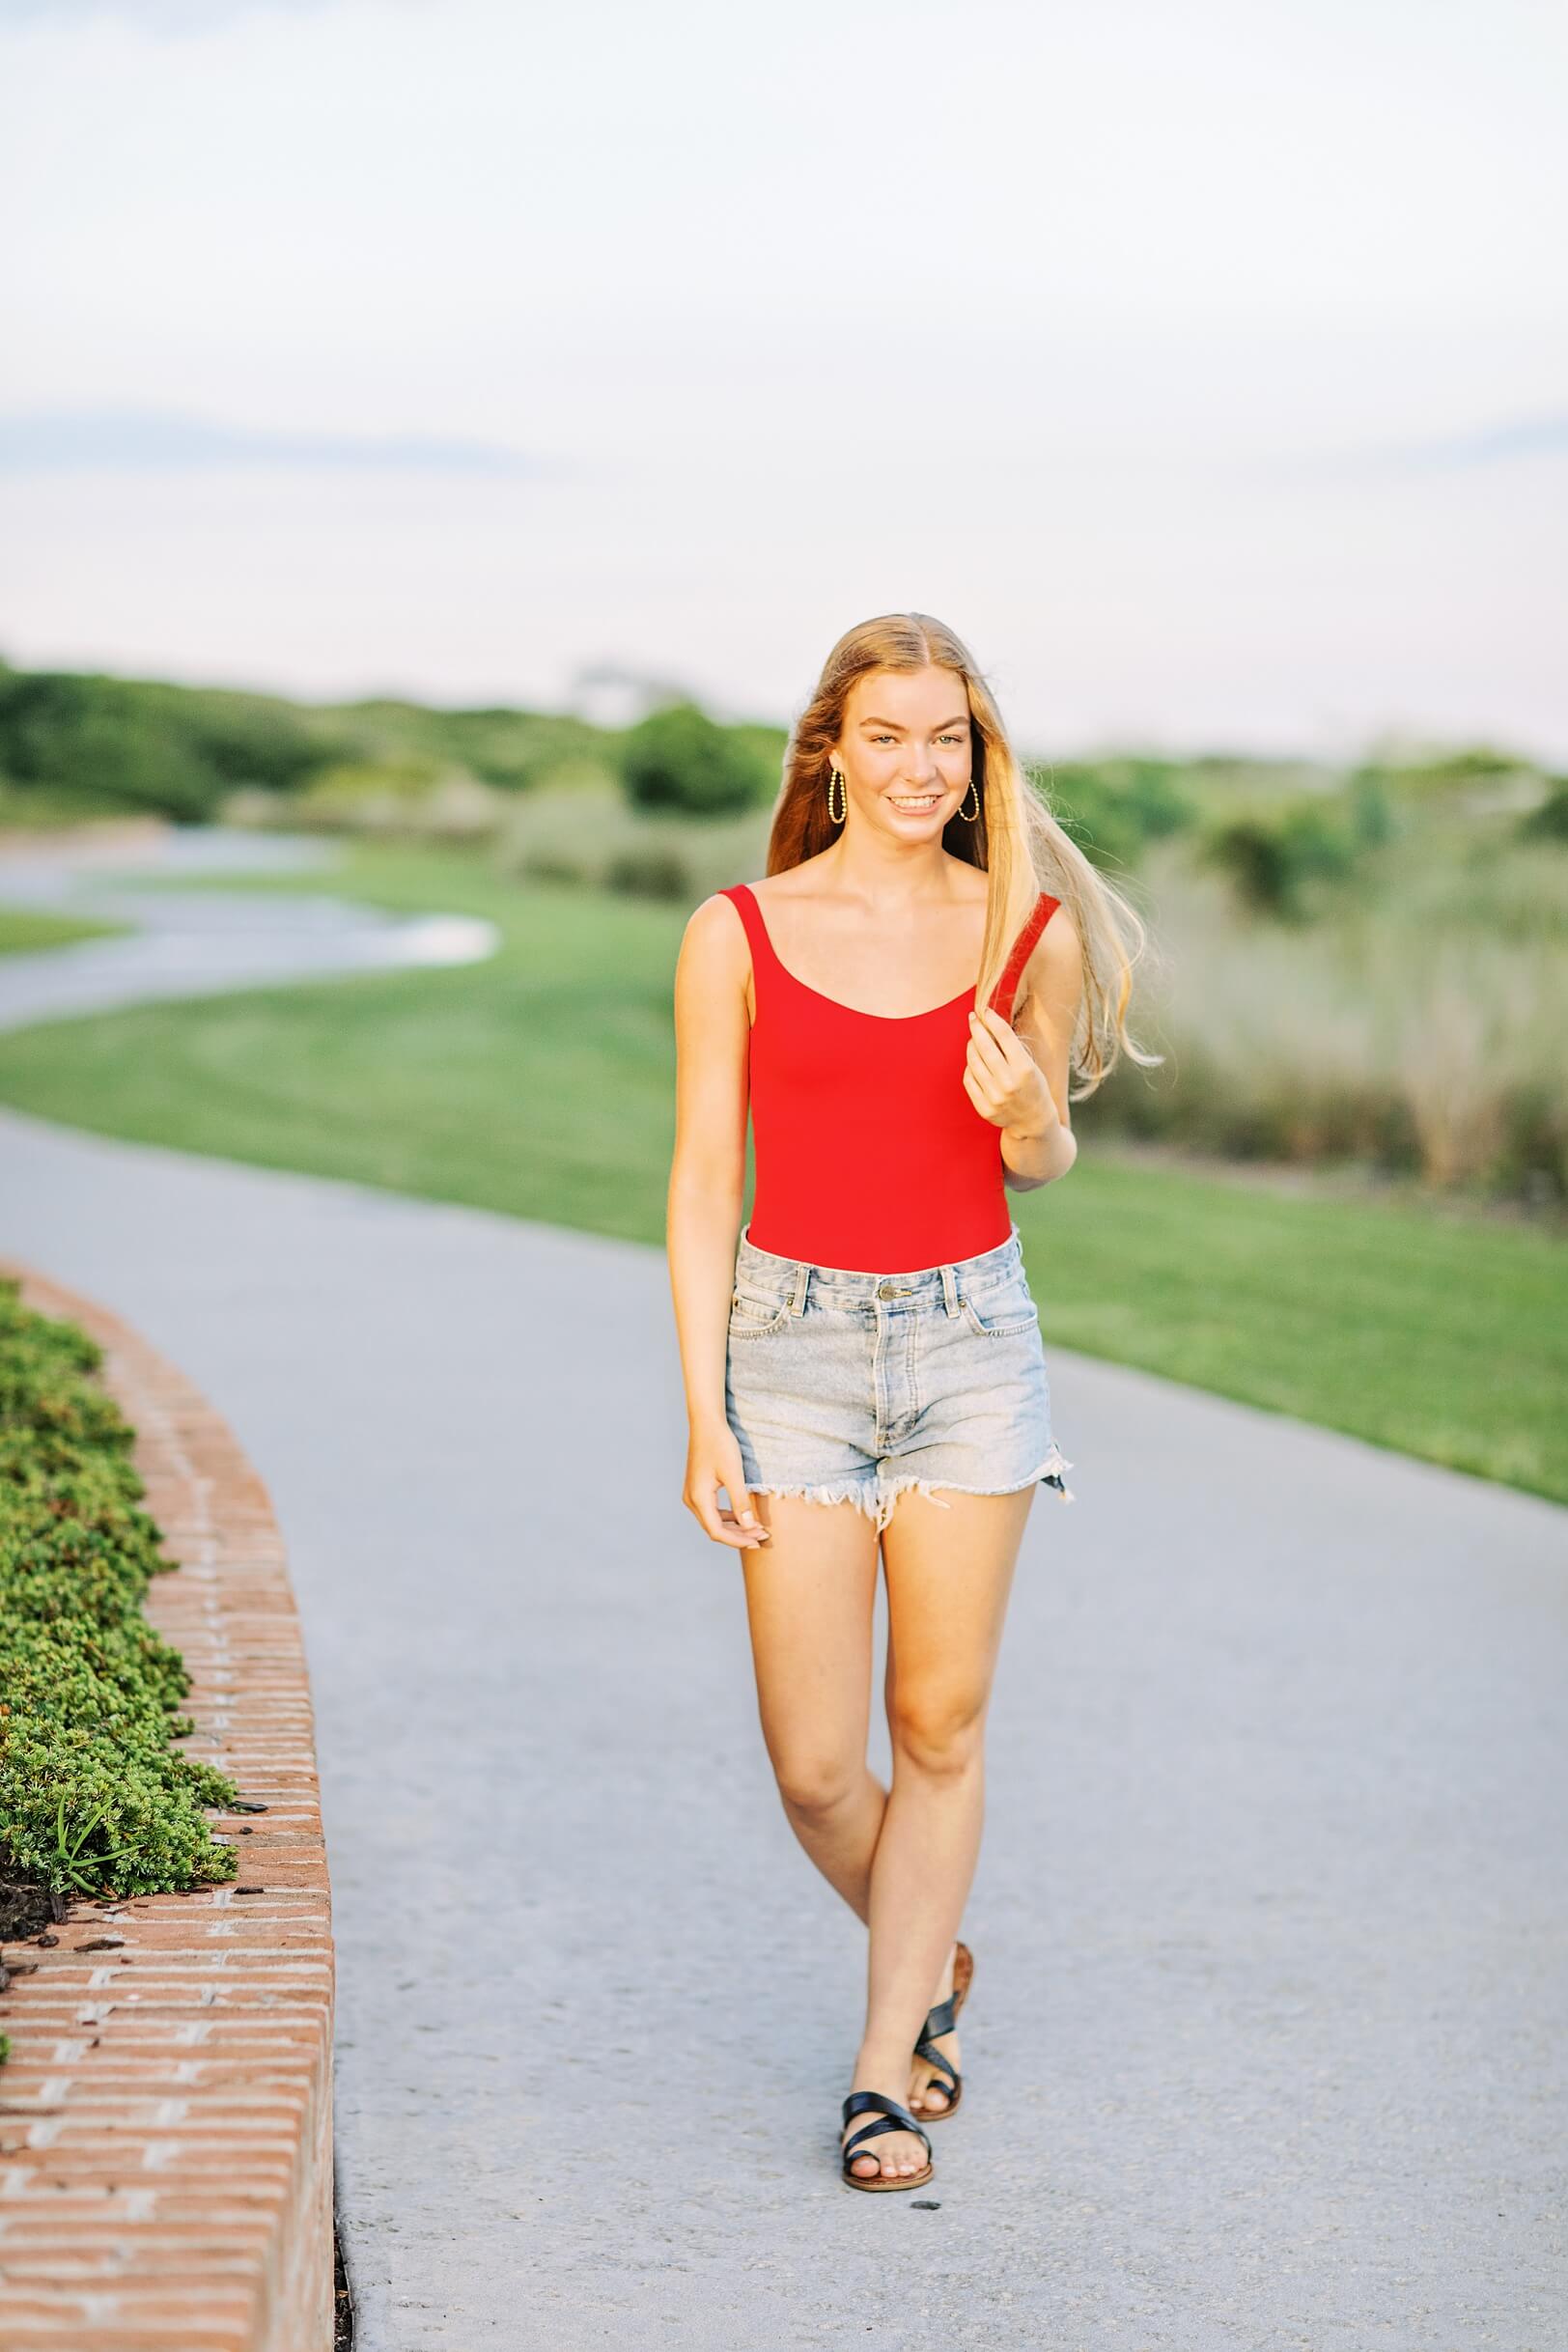 Red top with jean shorts, outfit ideas for senior pictures